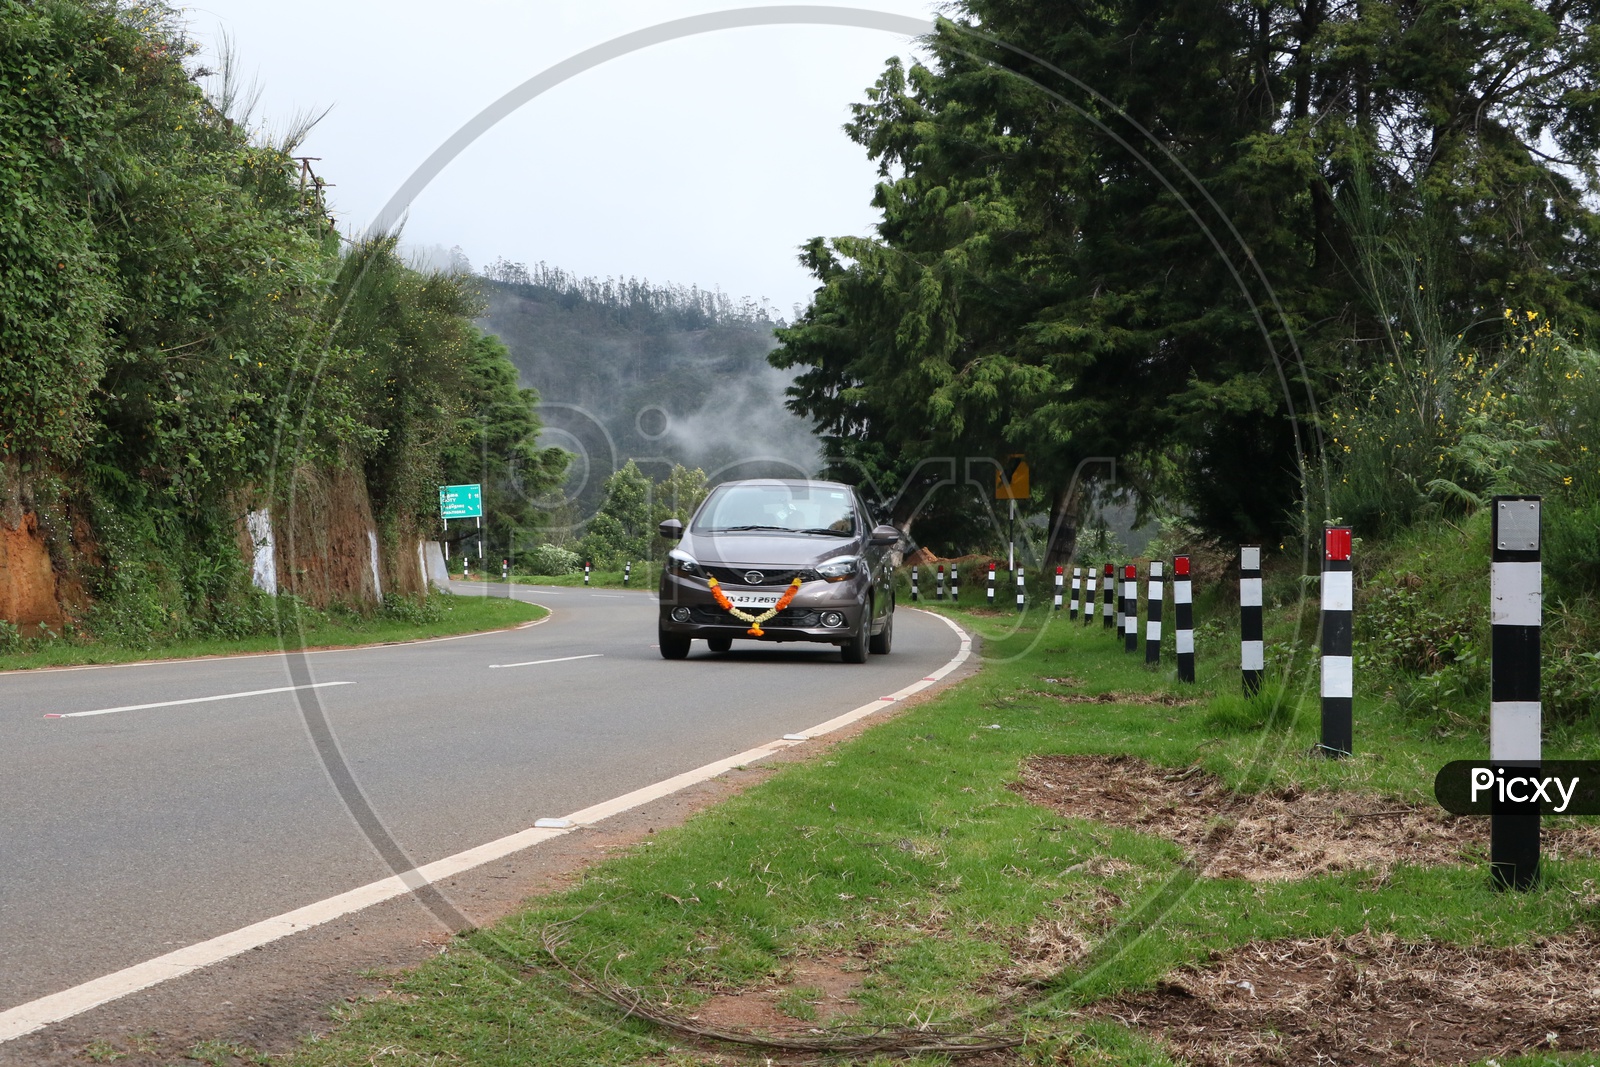 Vehicles on the Ghat Roads Of Ooty